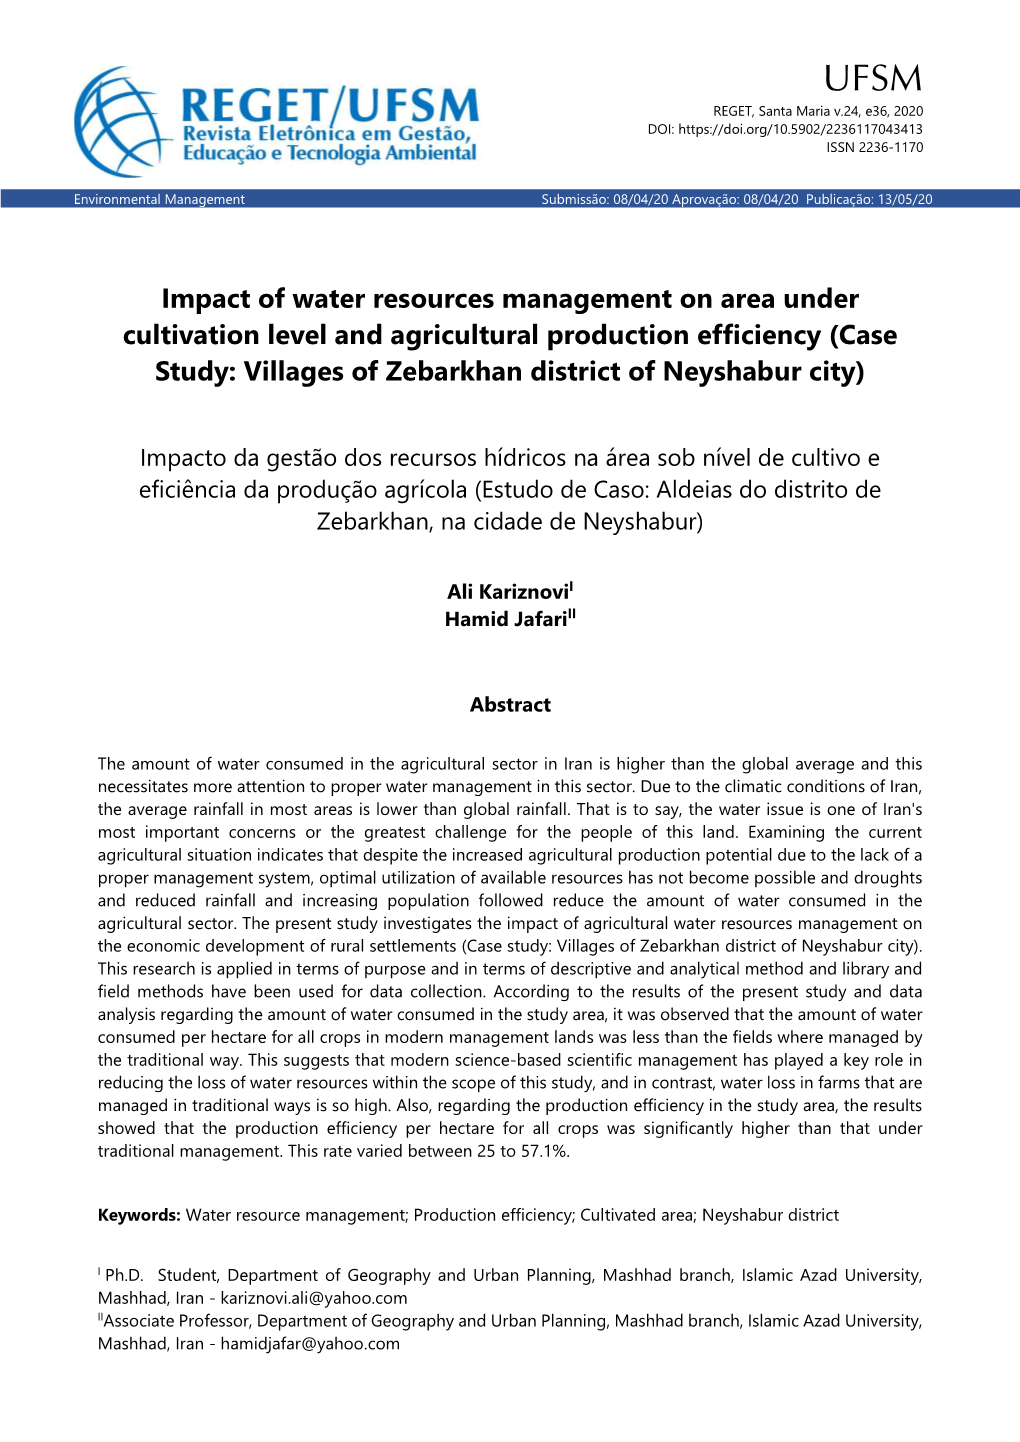 Impact of Water Resources Management on Area Under Cultivation